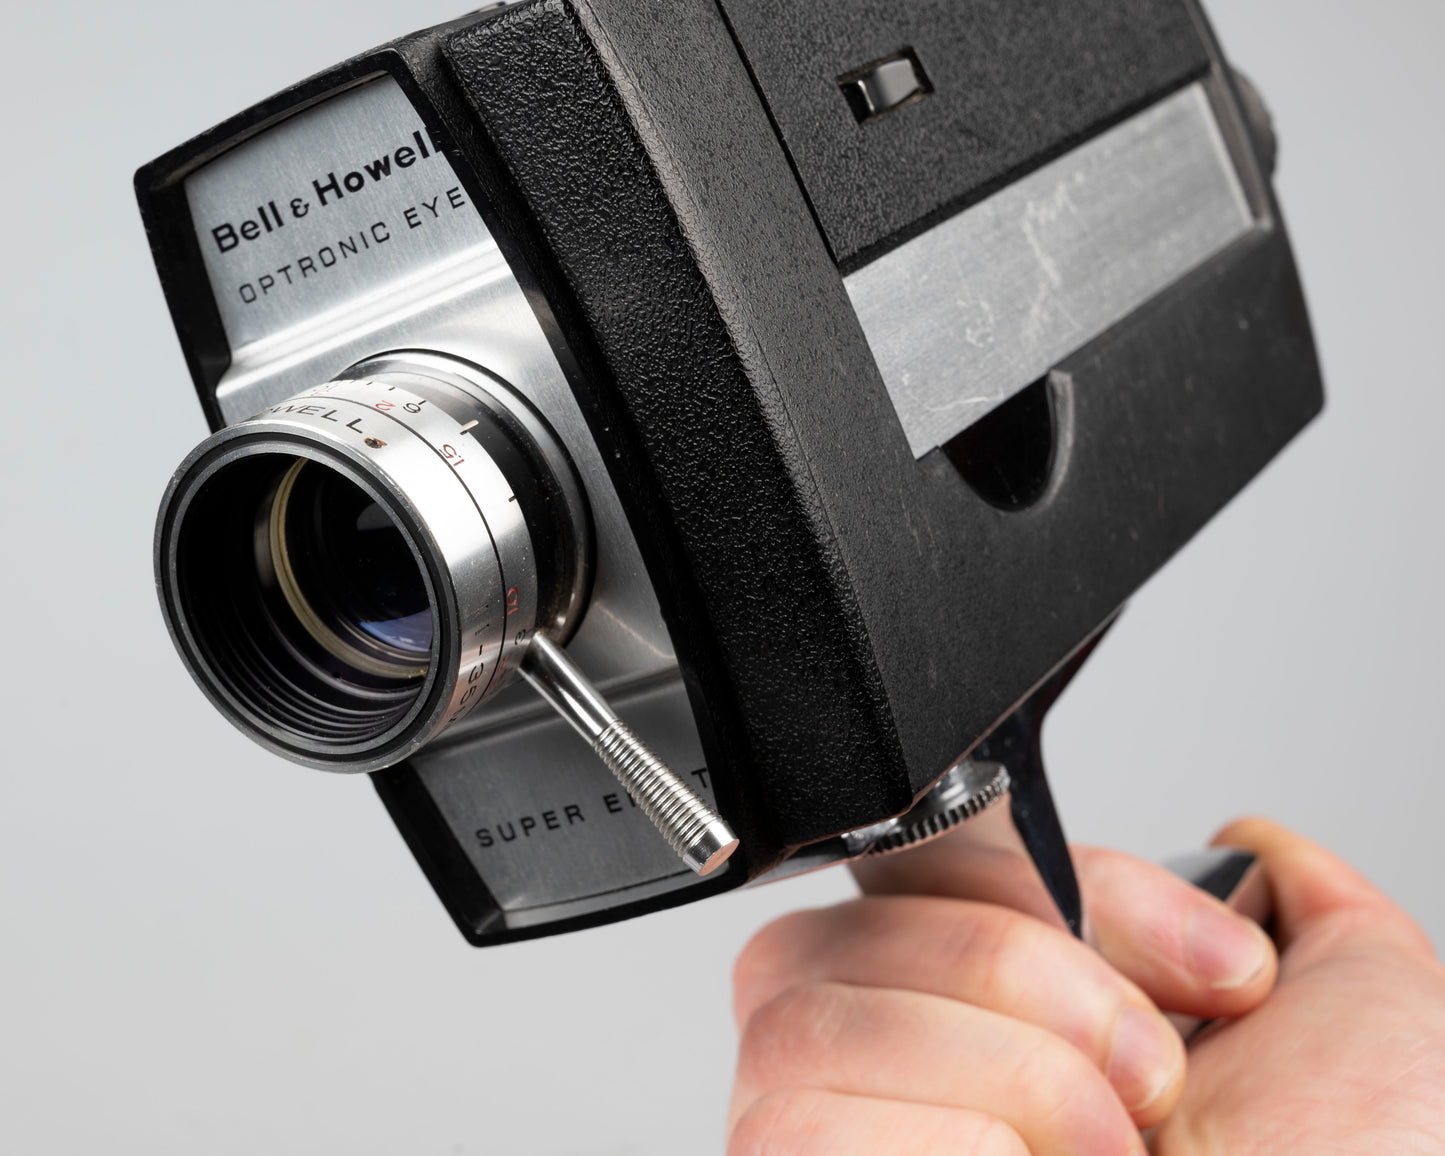 Bell and Howell 8429 Super 8 movie camera (serial 25829)